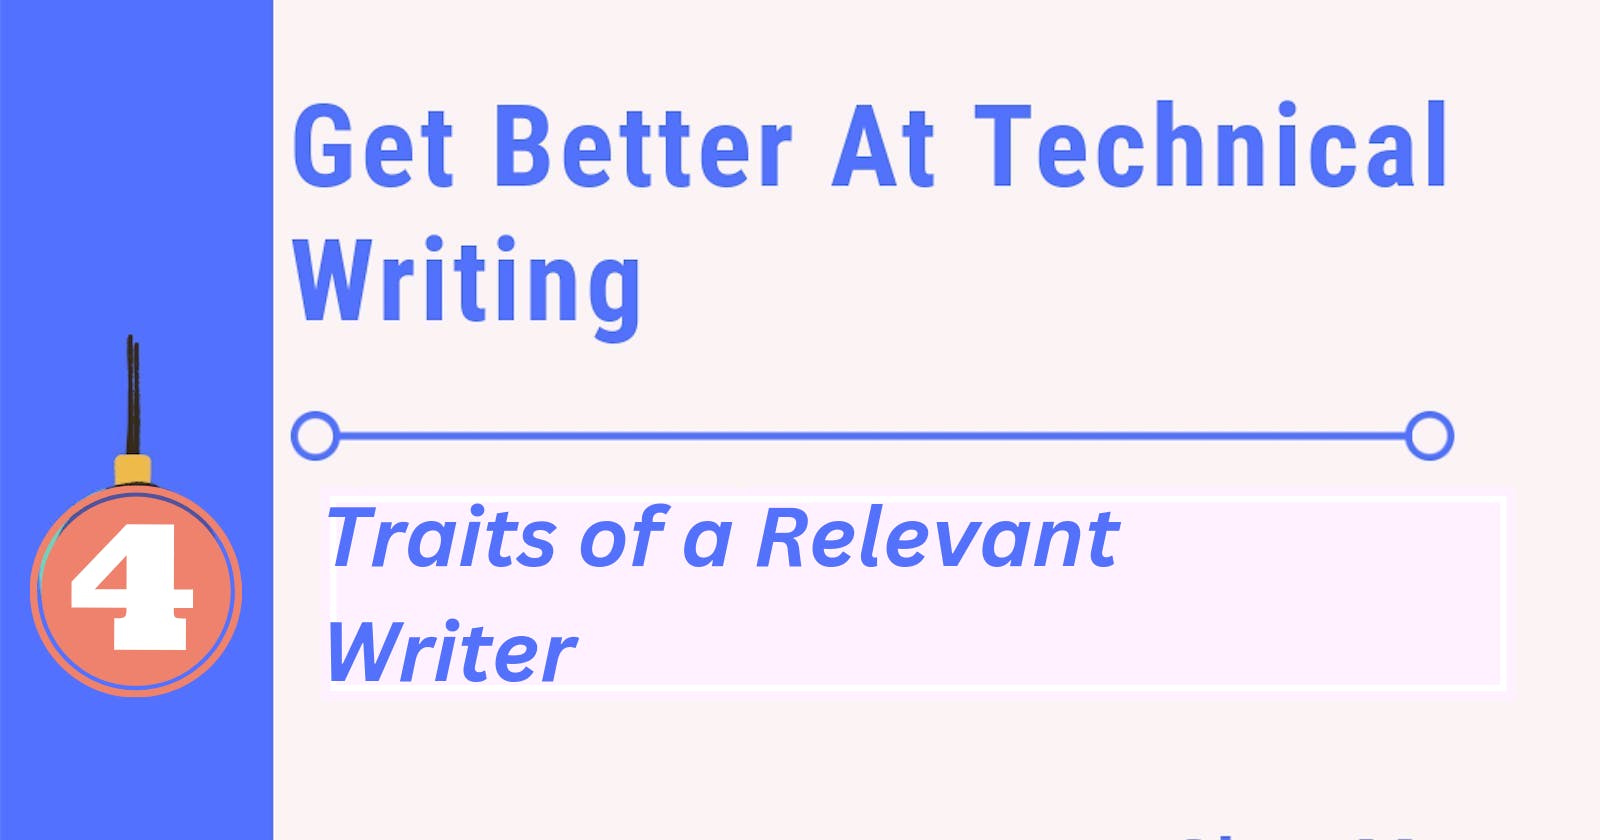 Get Better at Technical Writing 4: Traits of a relevant writer